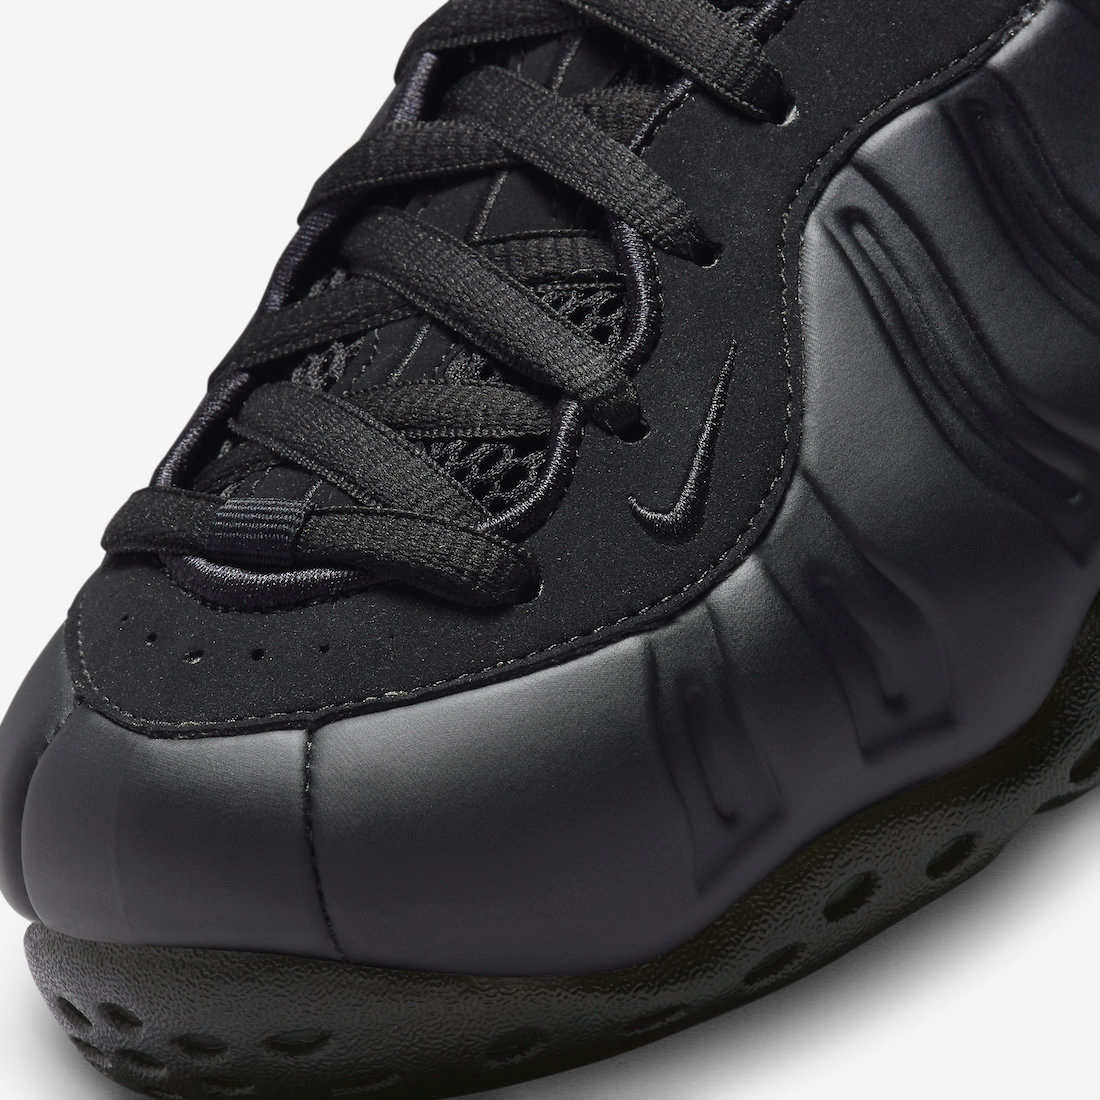 Nike-Air-Foamposite-One-Anthracite-2023-Release-Date-7